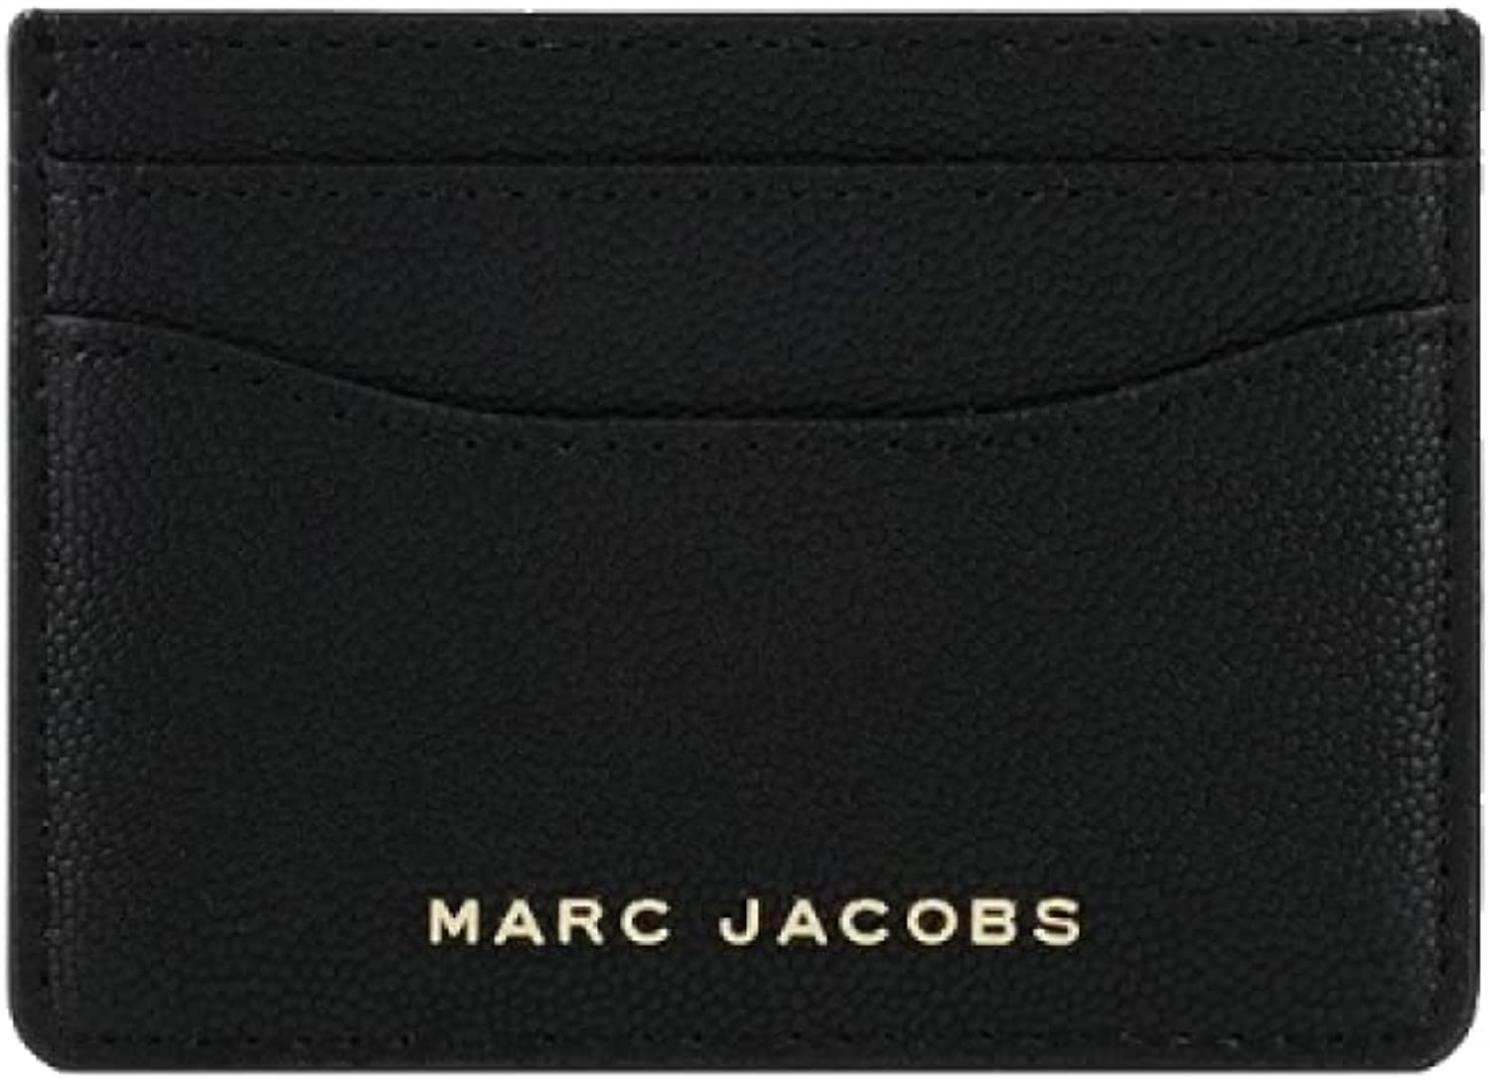 Marc Jacobs M0016997 Black With Gold Hardware Daily Card Women's Pebbled Leather Case